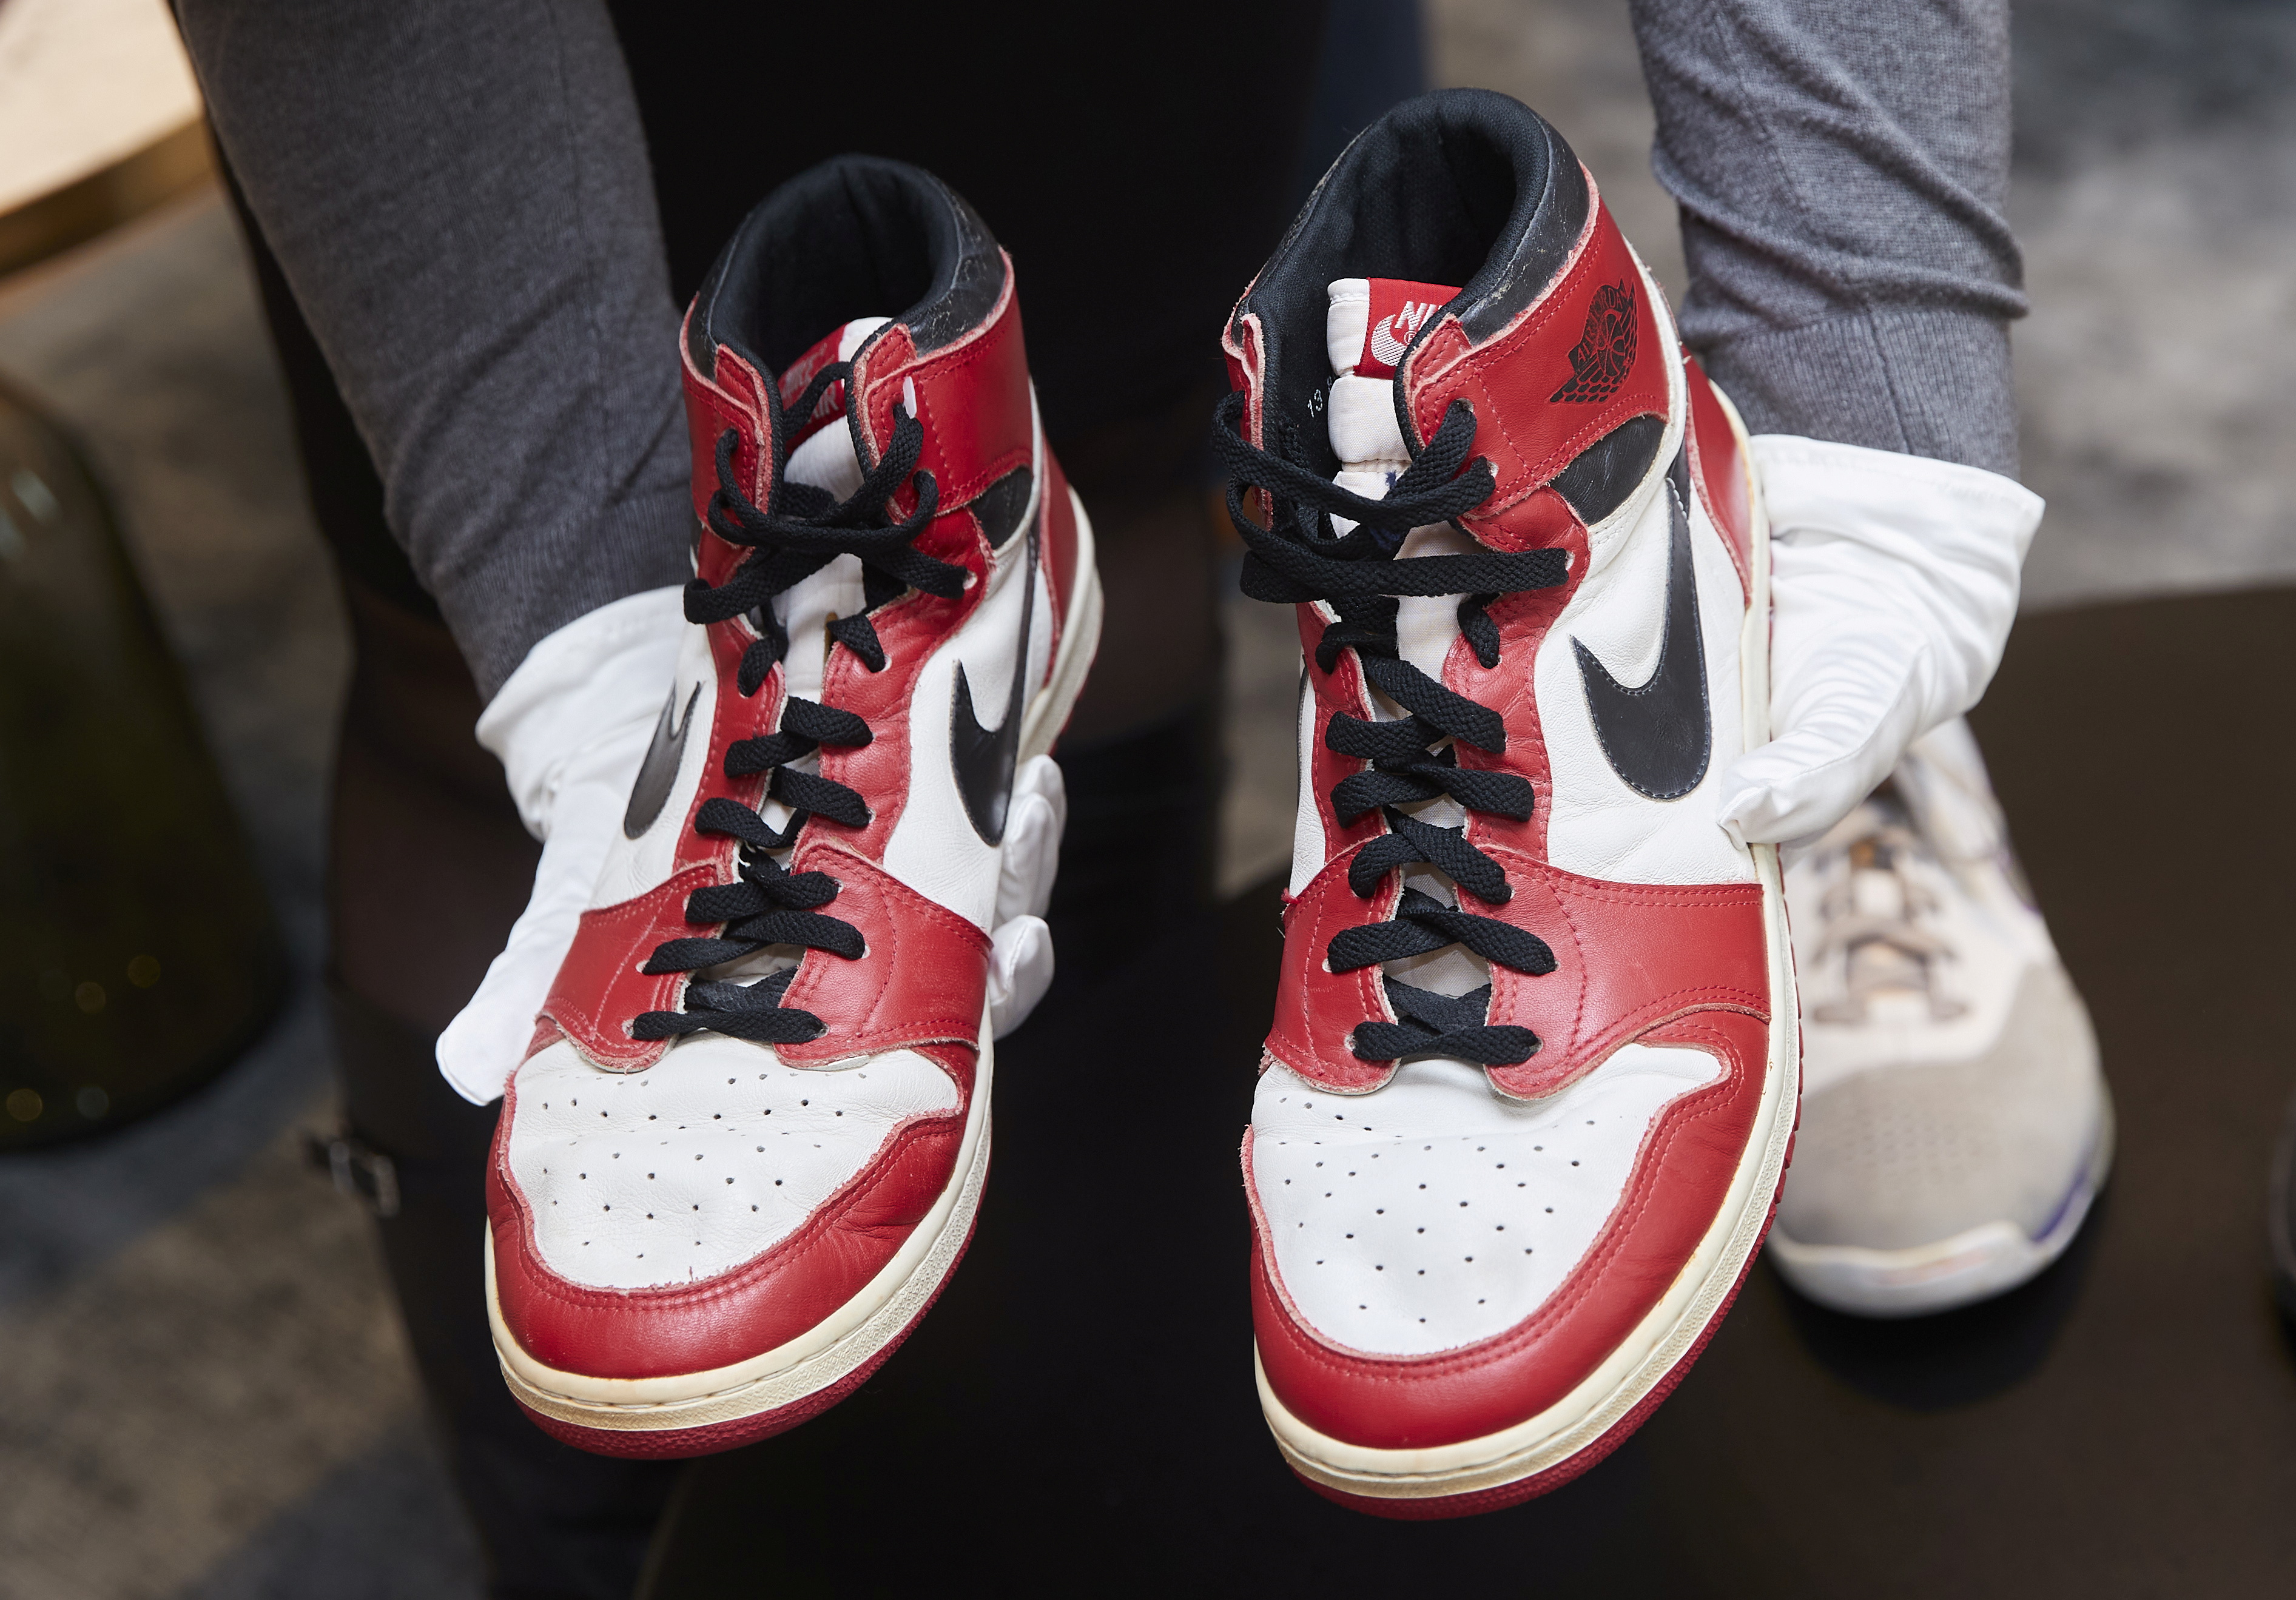 Preview for the auction of Michael Jordan's sneakers, in Geneva